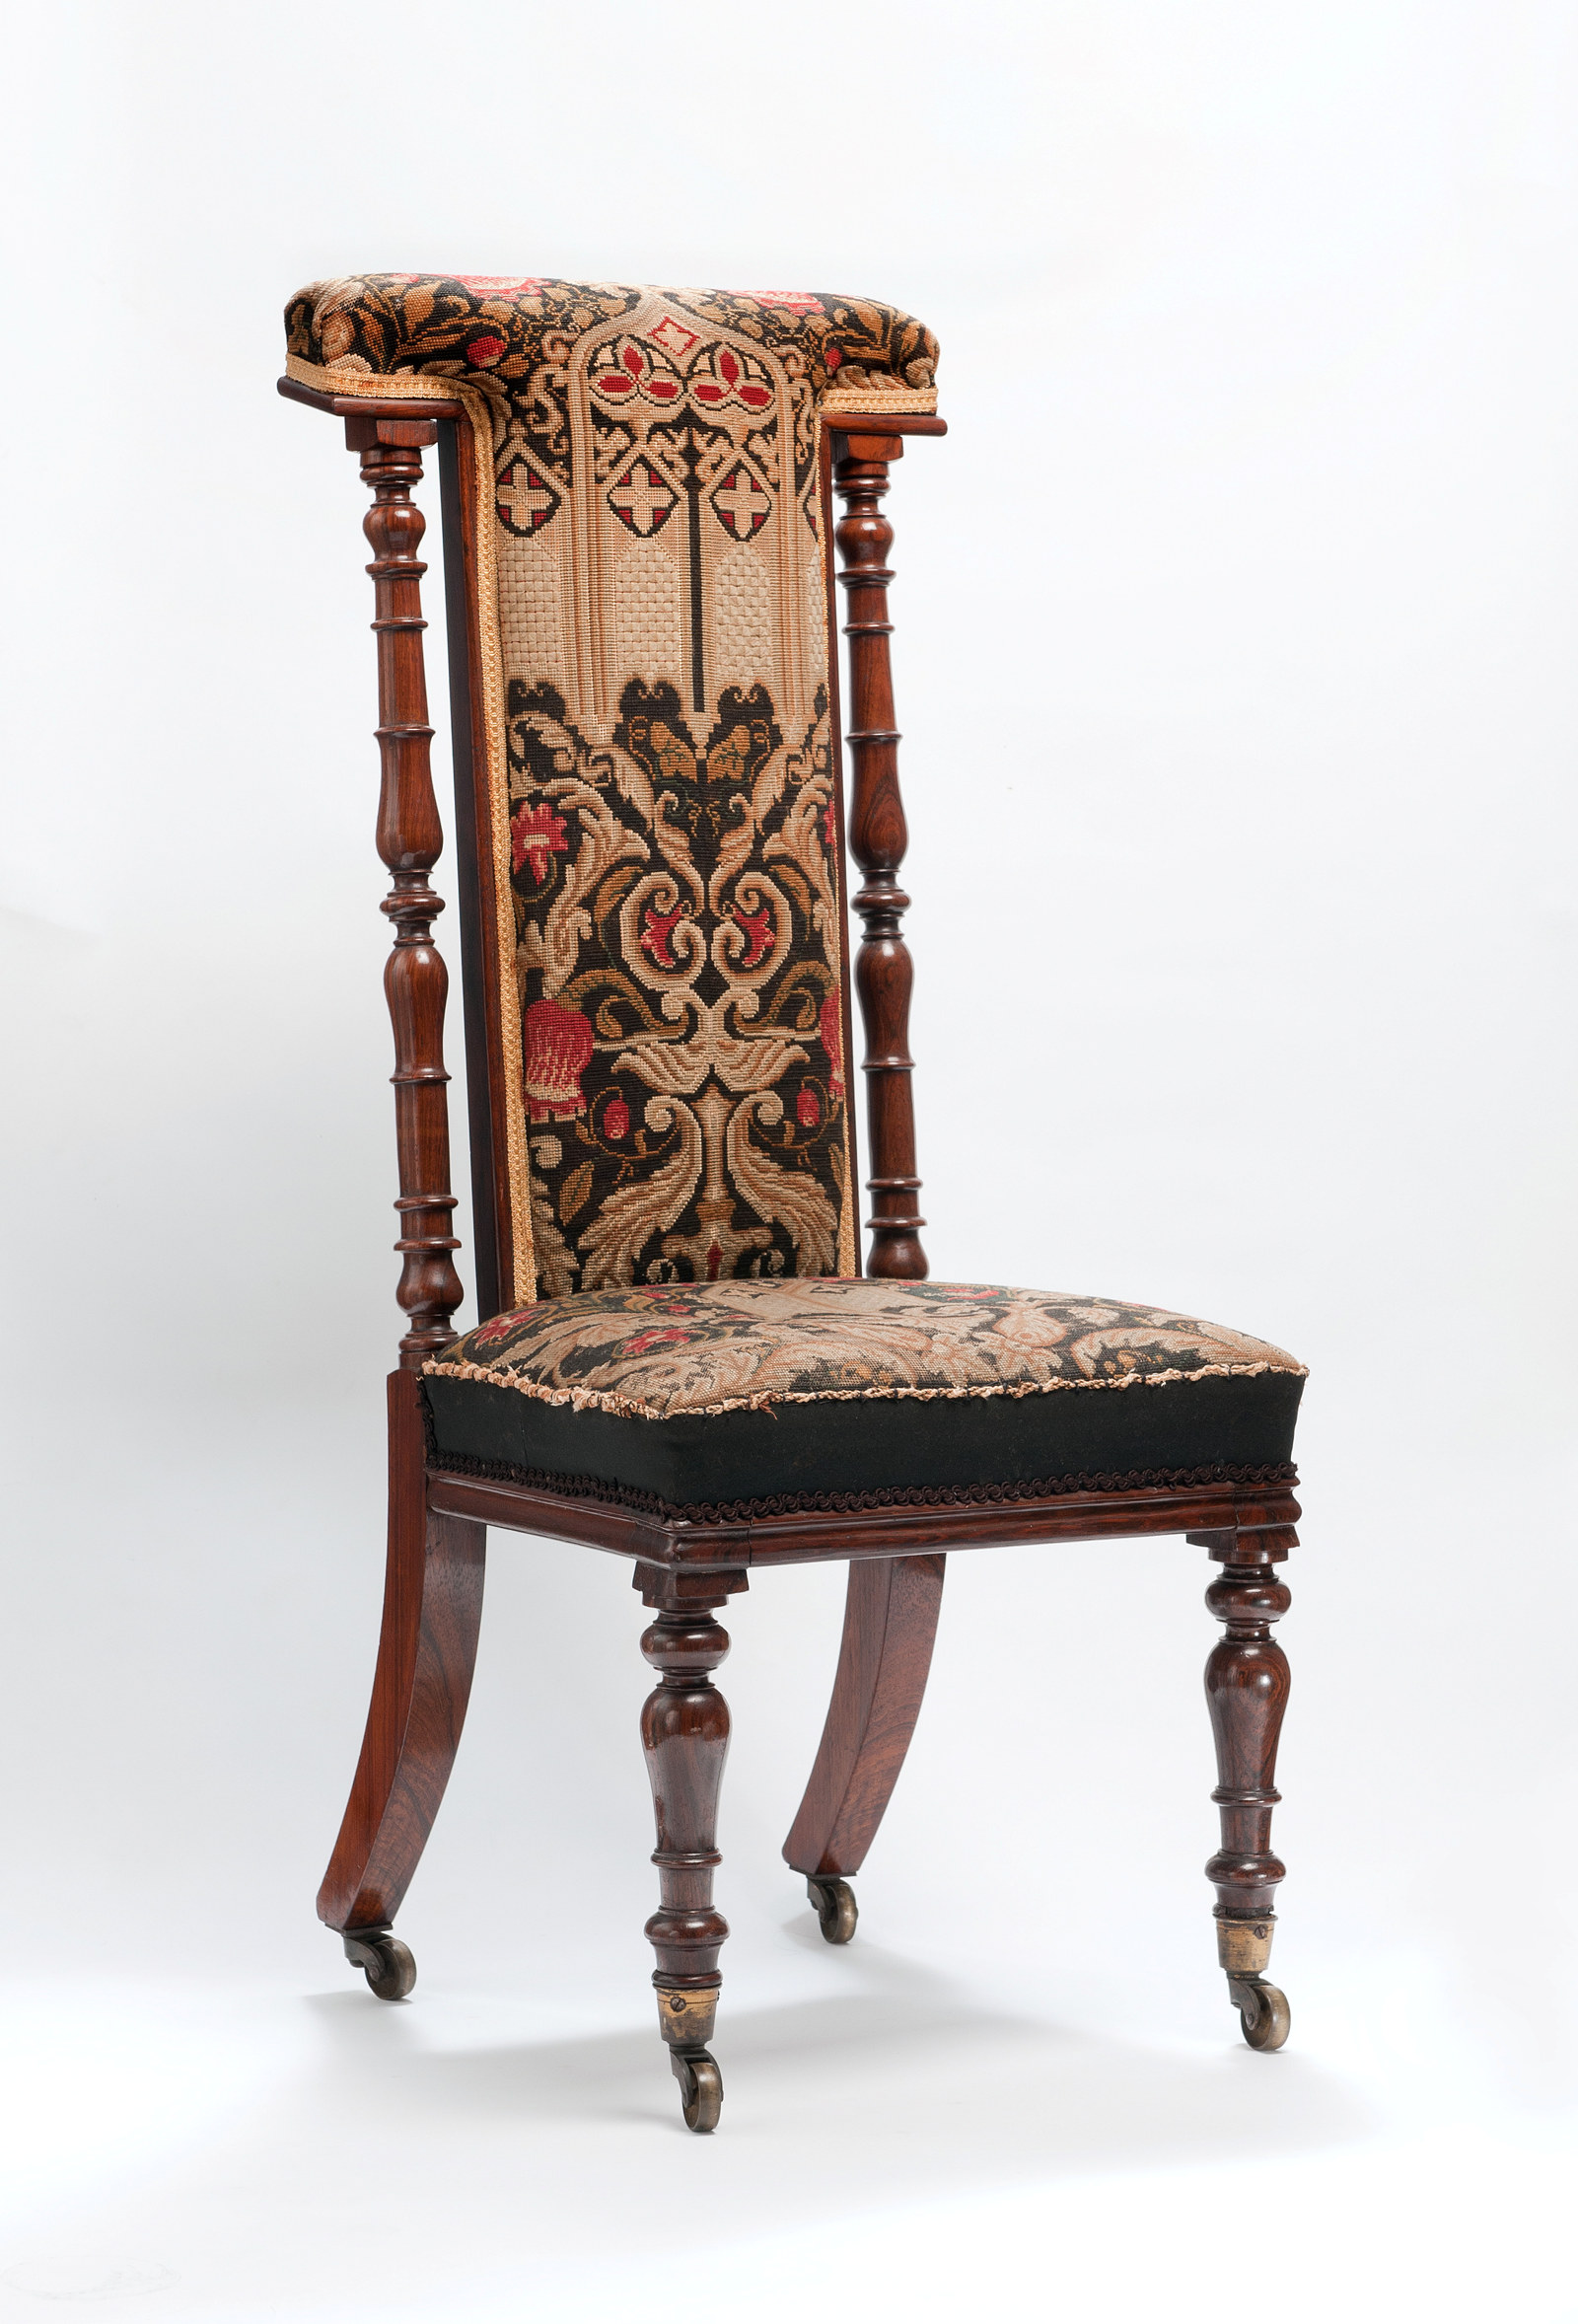 Rosewood prie dieu chair with back and seat upholstered in Berlin Woolwork, circa 1850